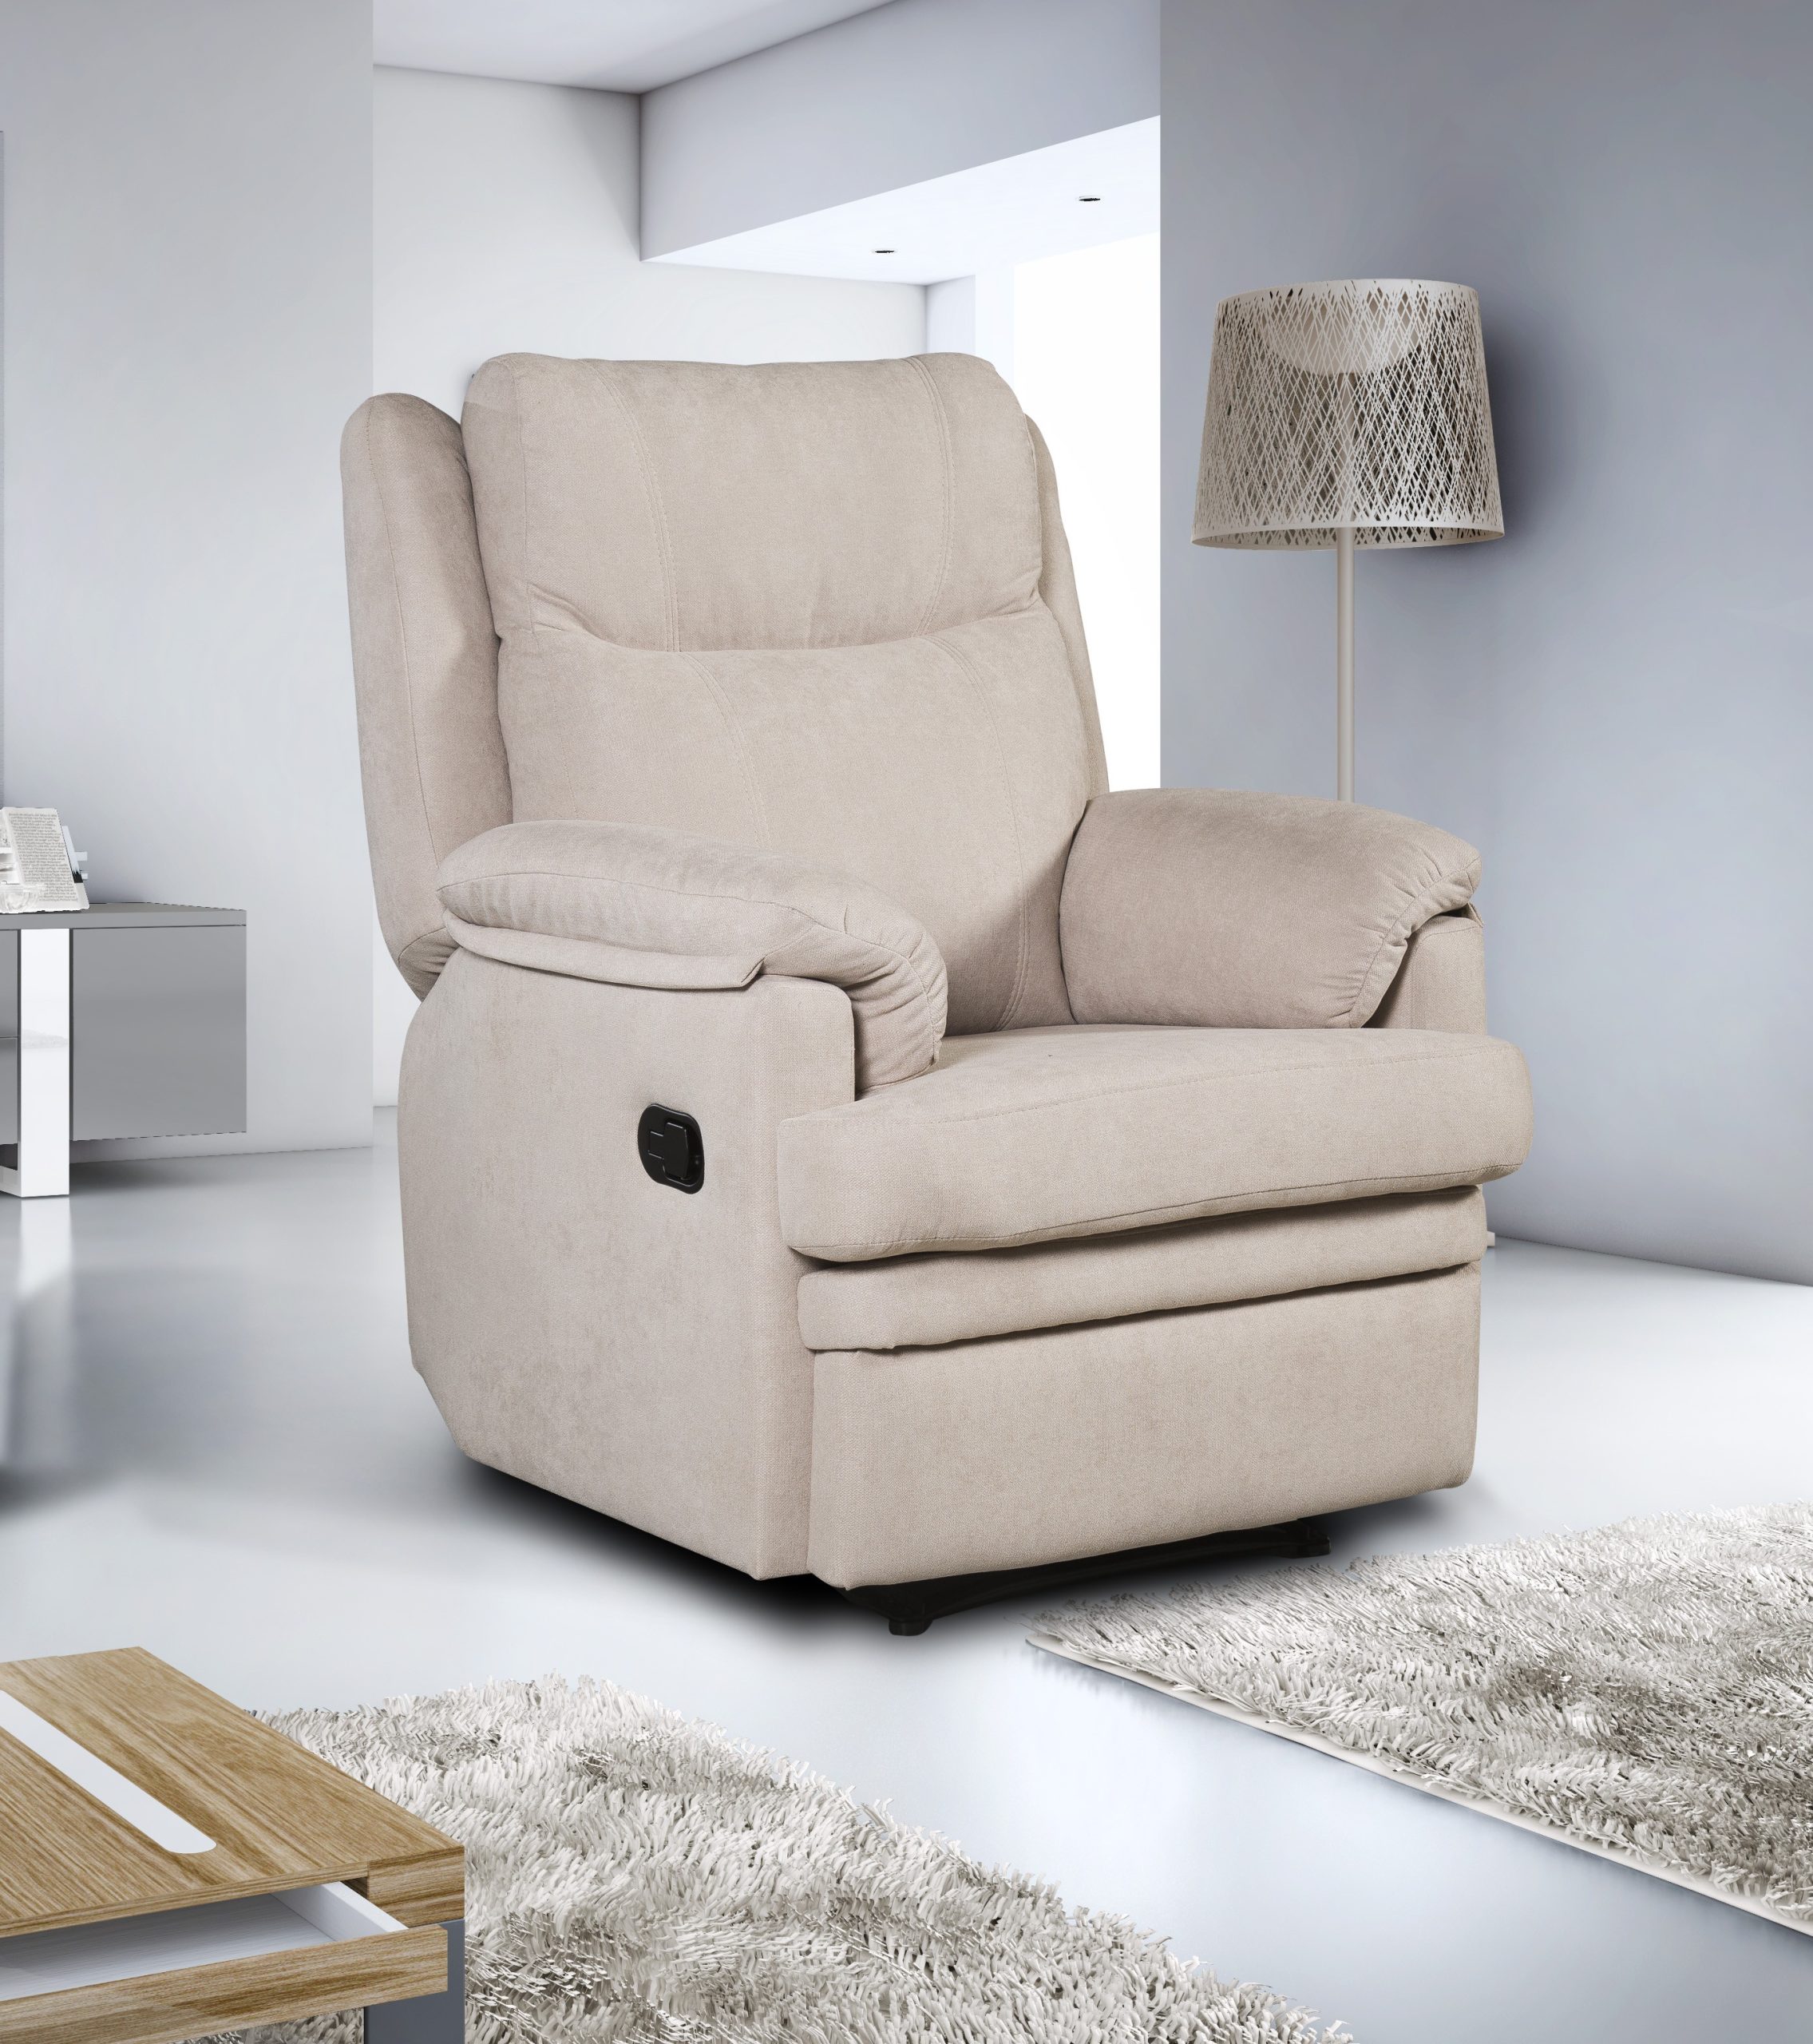 Sillon Relax Boston Reclinable Manual con Reposapies Color Gris y Beige